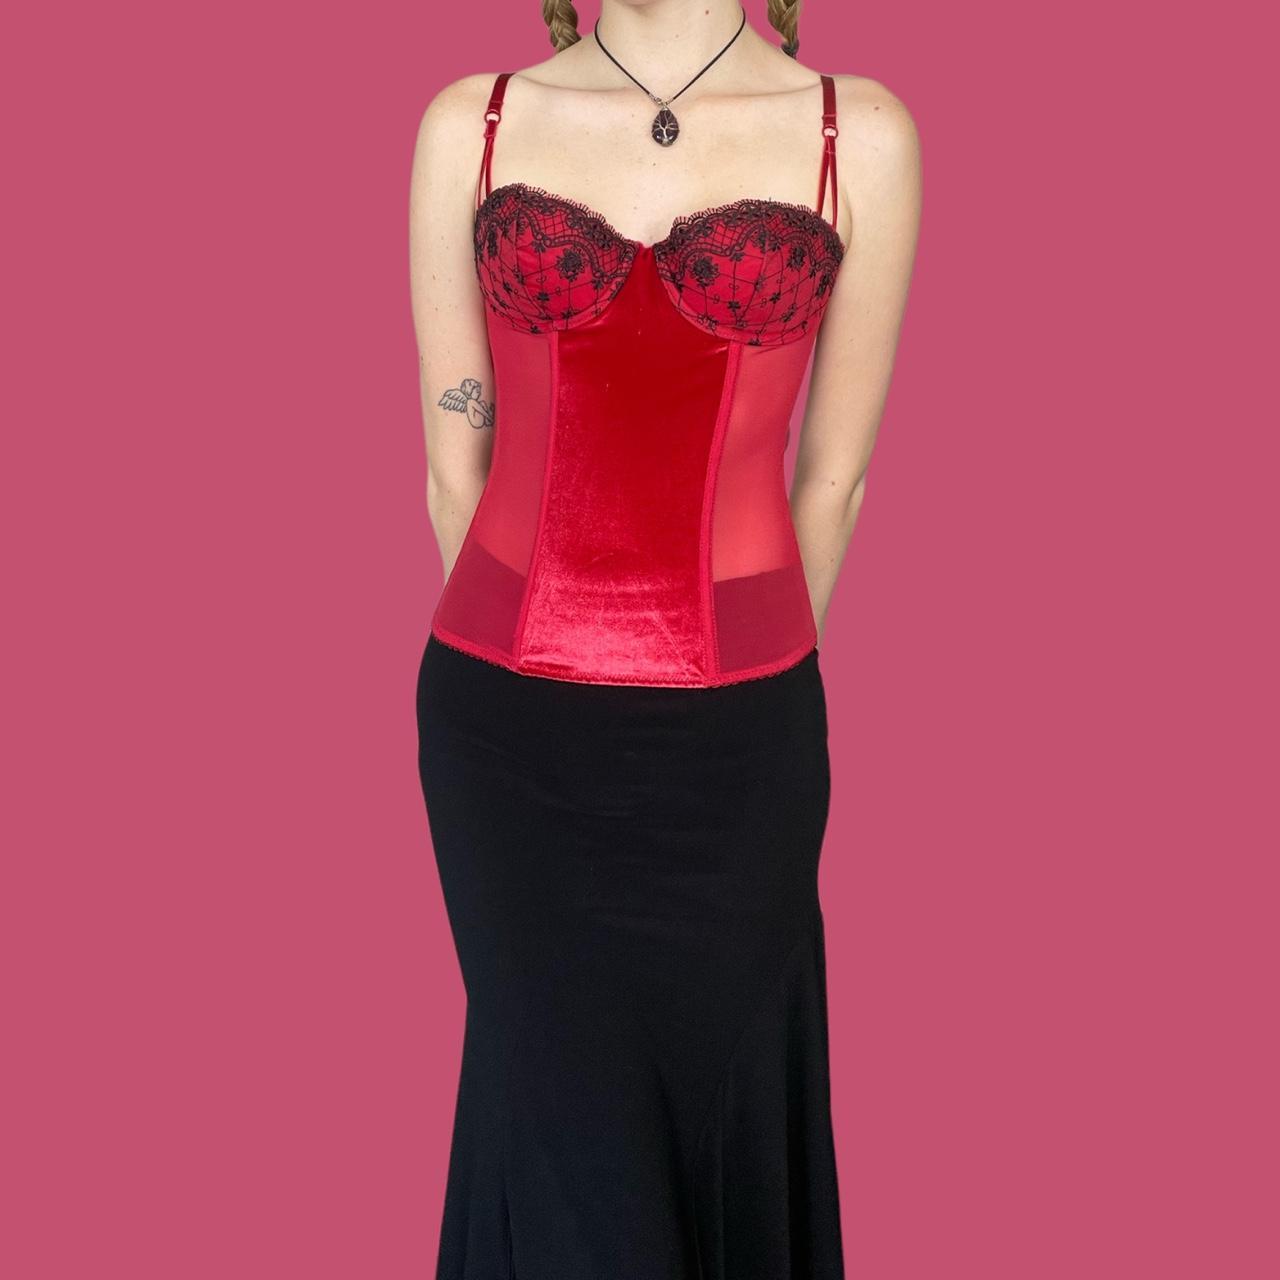 Smart and Sexy Women's Red and Black Corset (3)